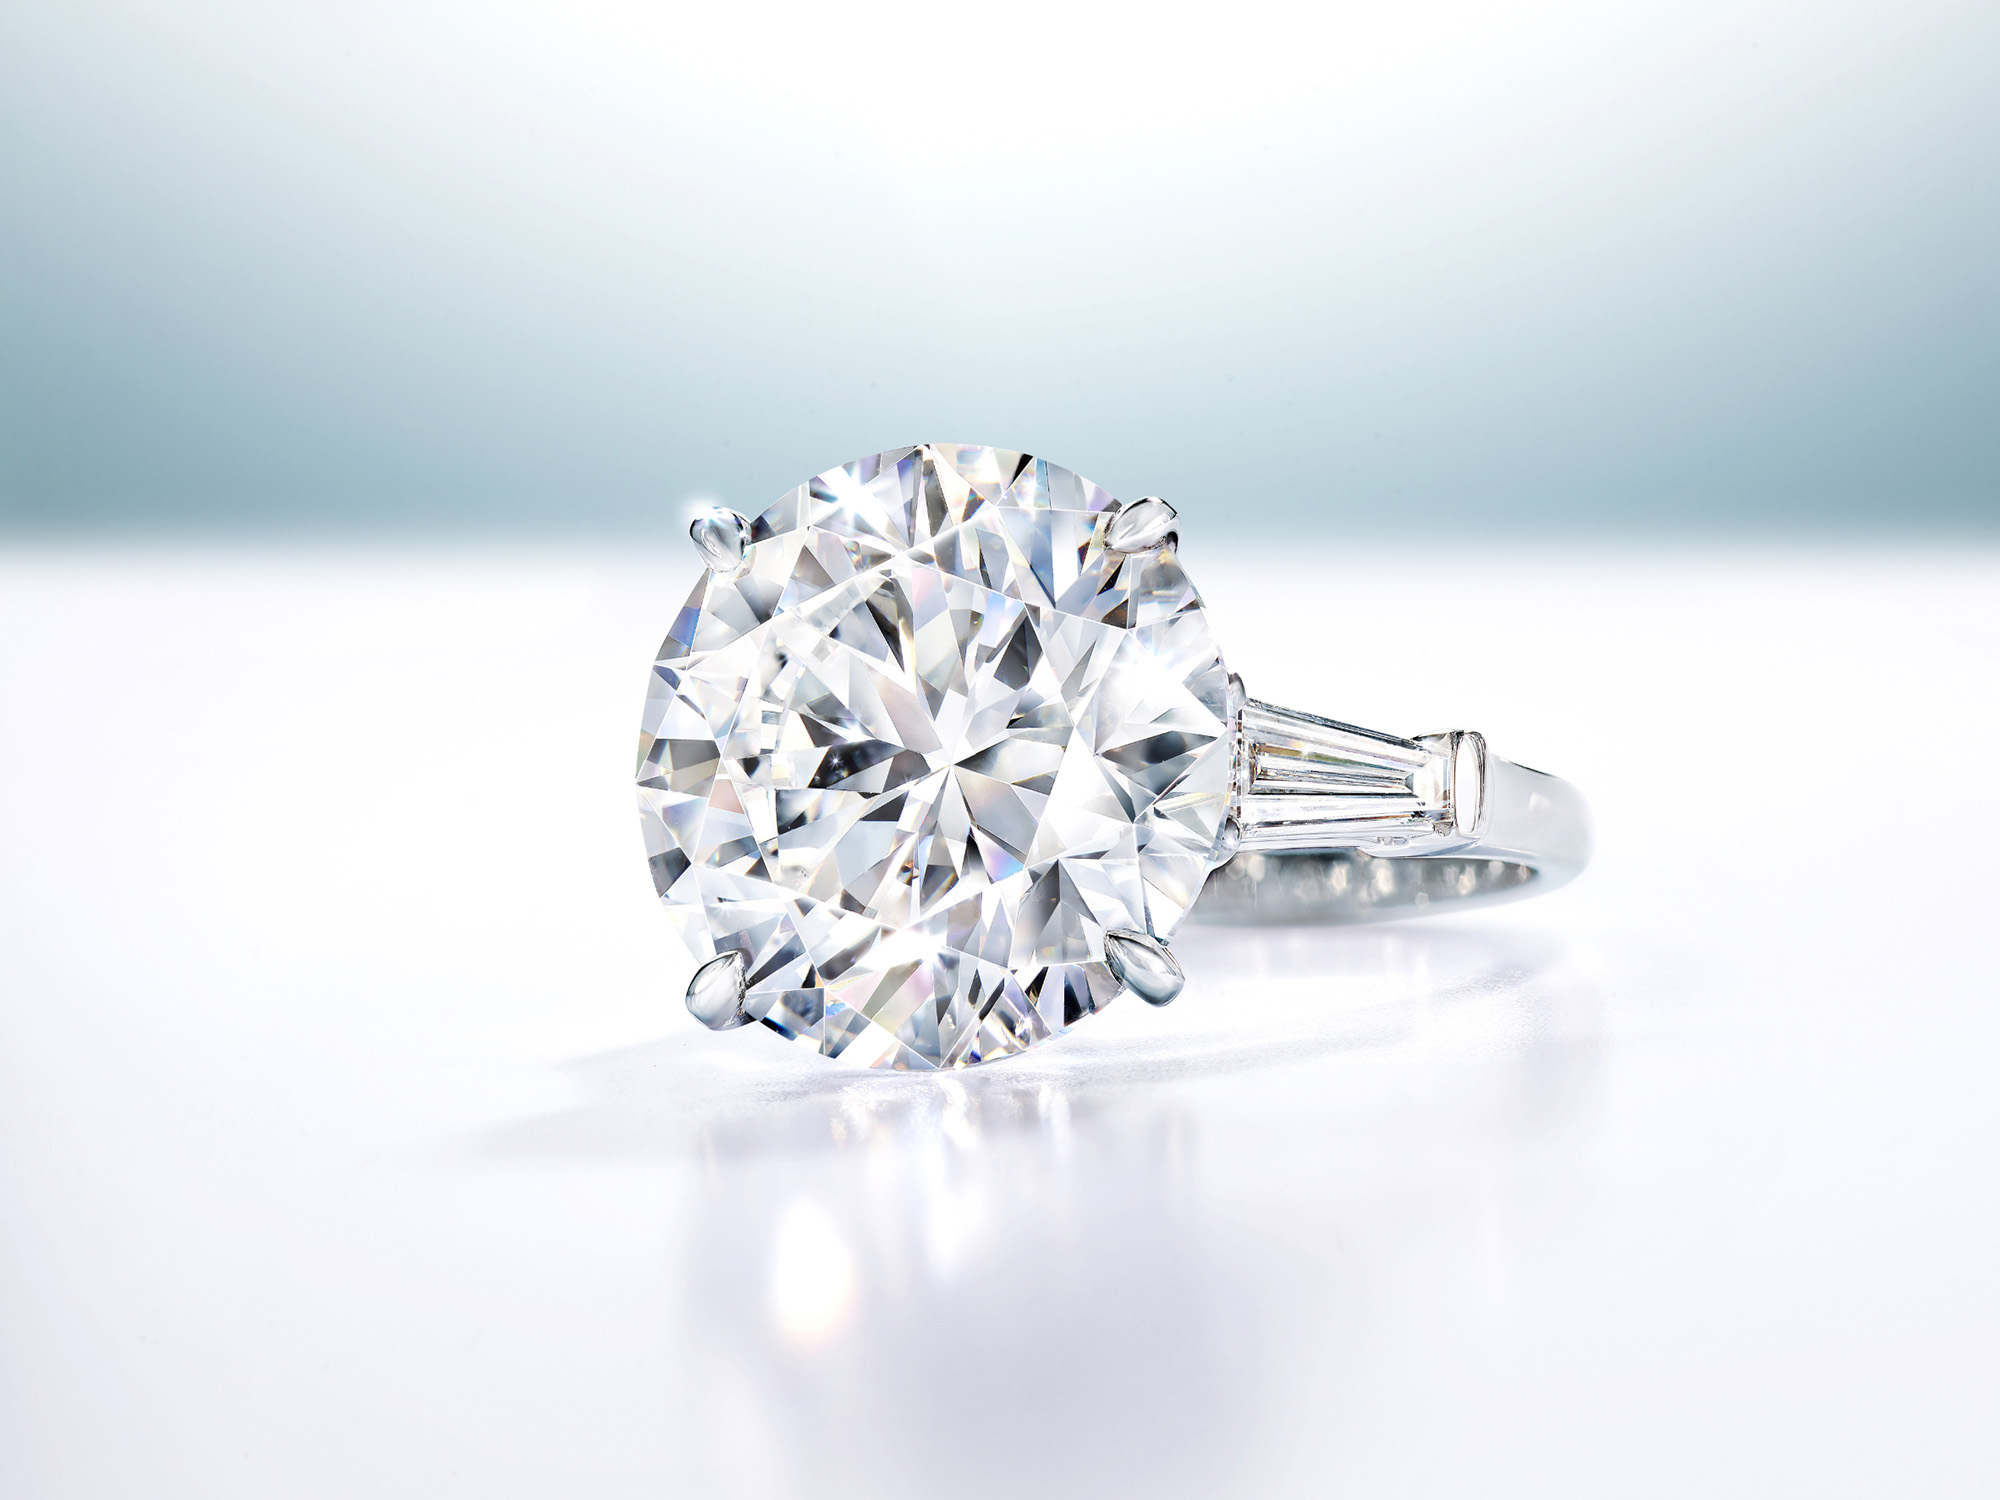 Promise Round Diamond Engagement Ring with baguette side stones from the Graff Bridal collection